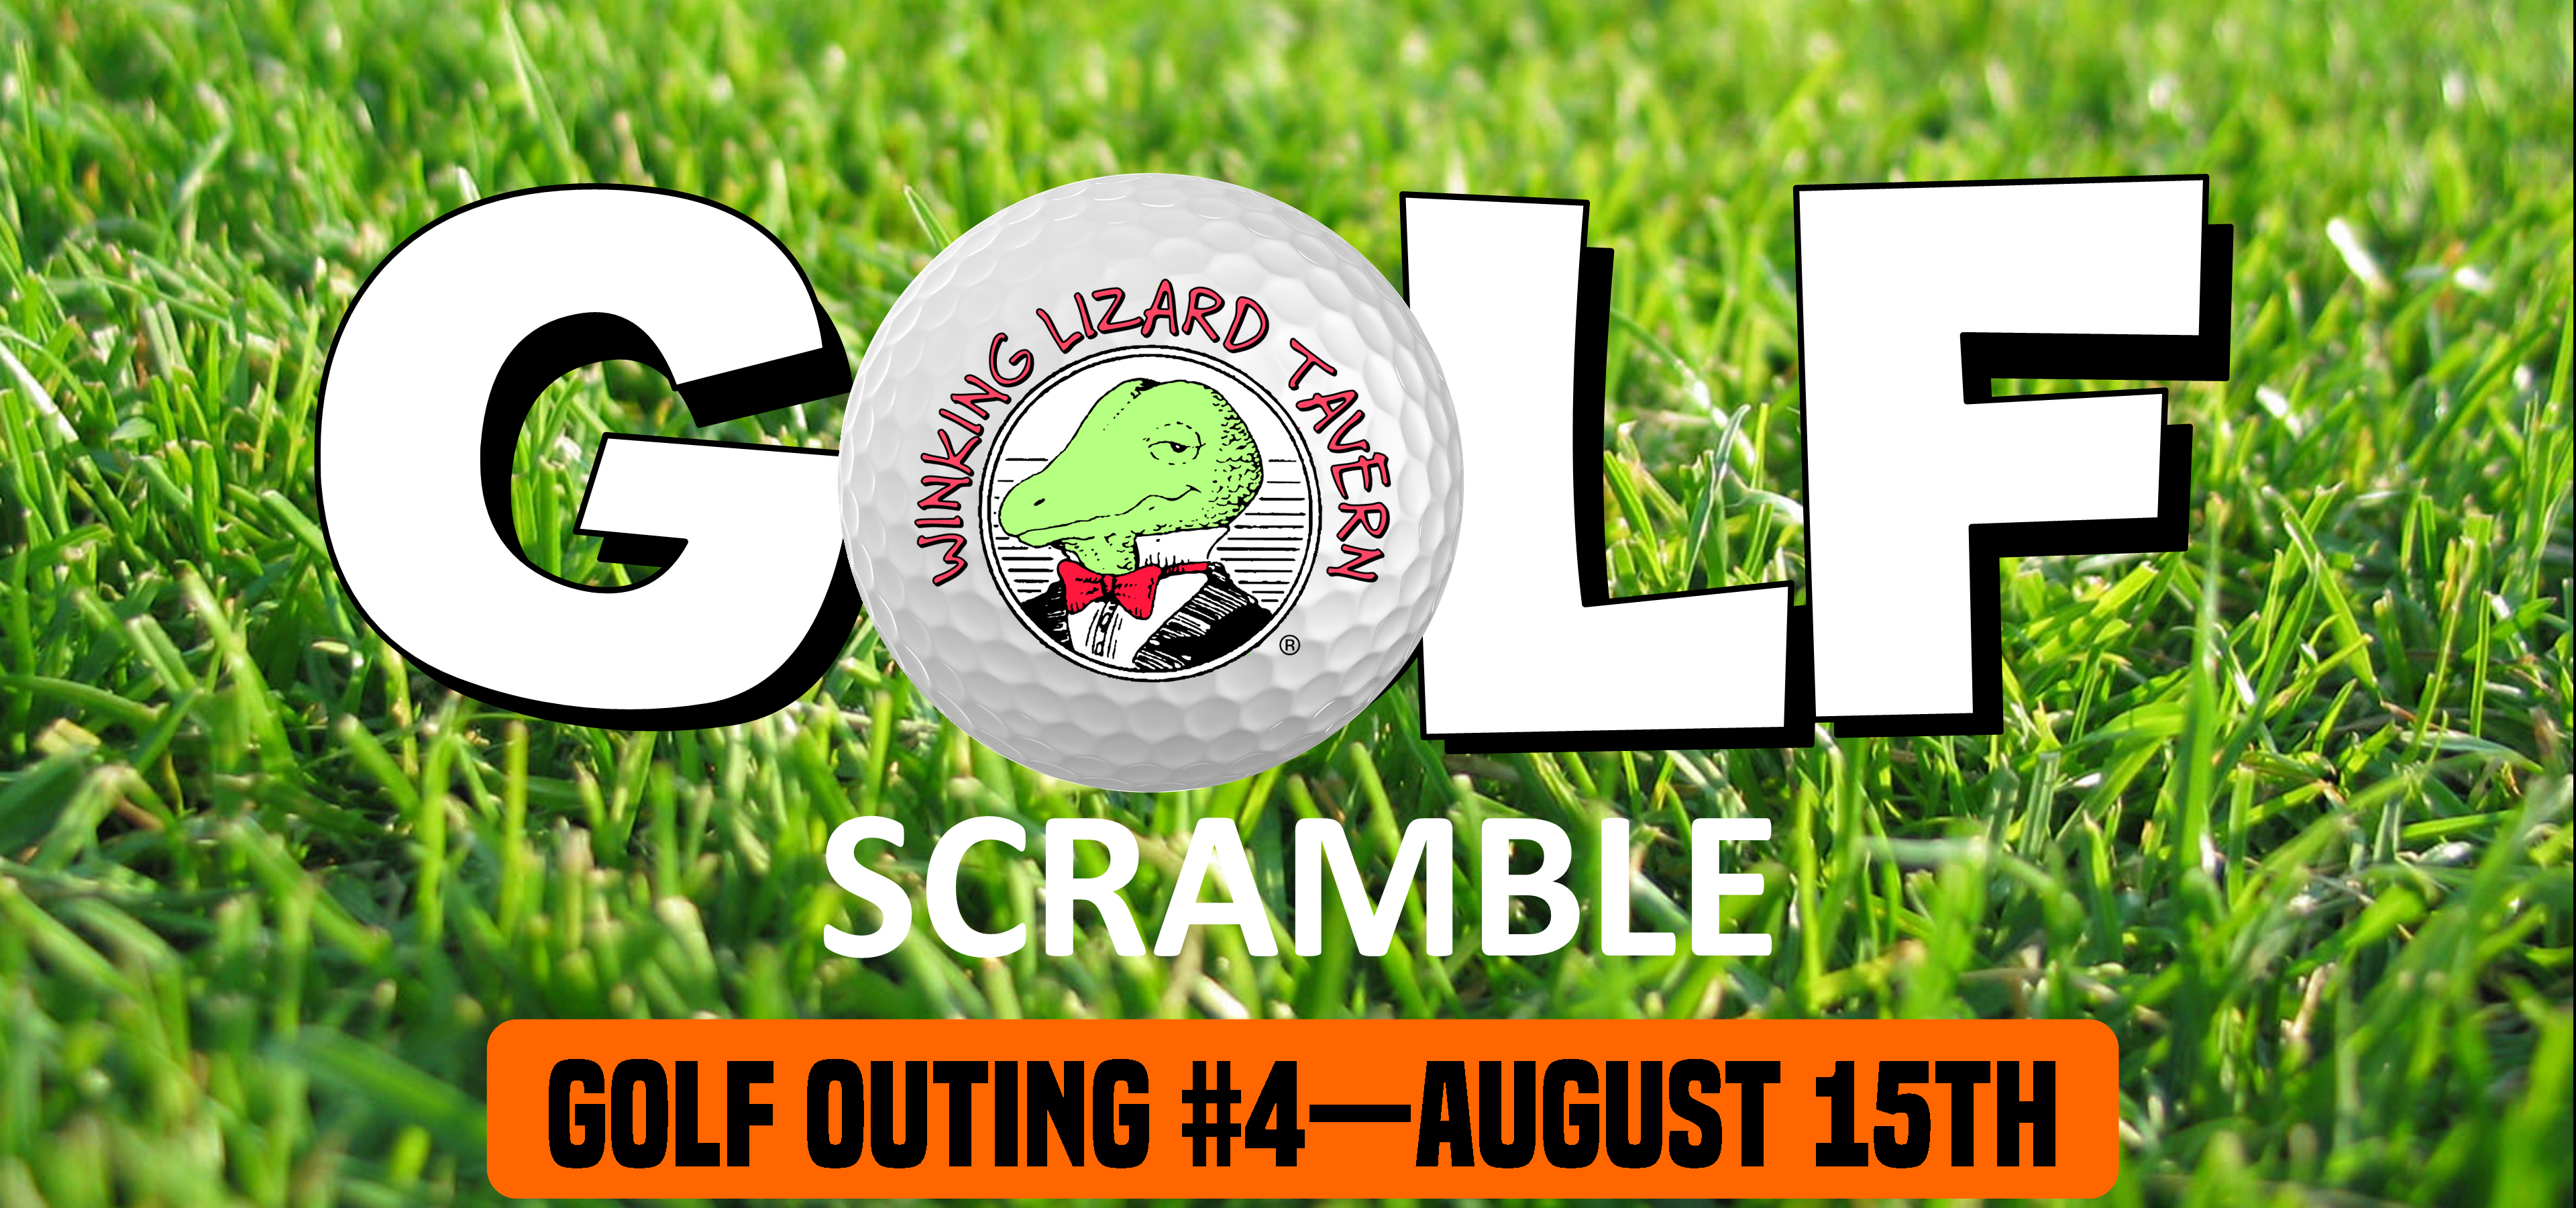 Winking Lizard Golf Outing #4 @ Skyland Pines Golf Course